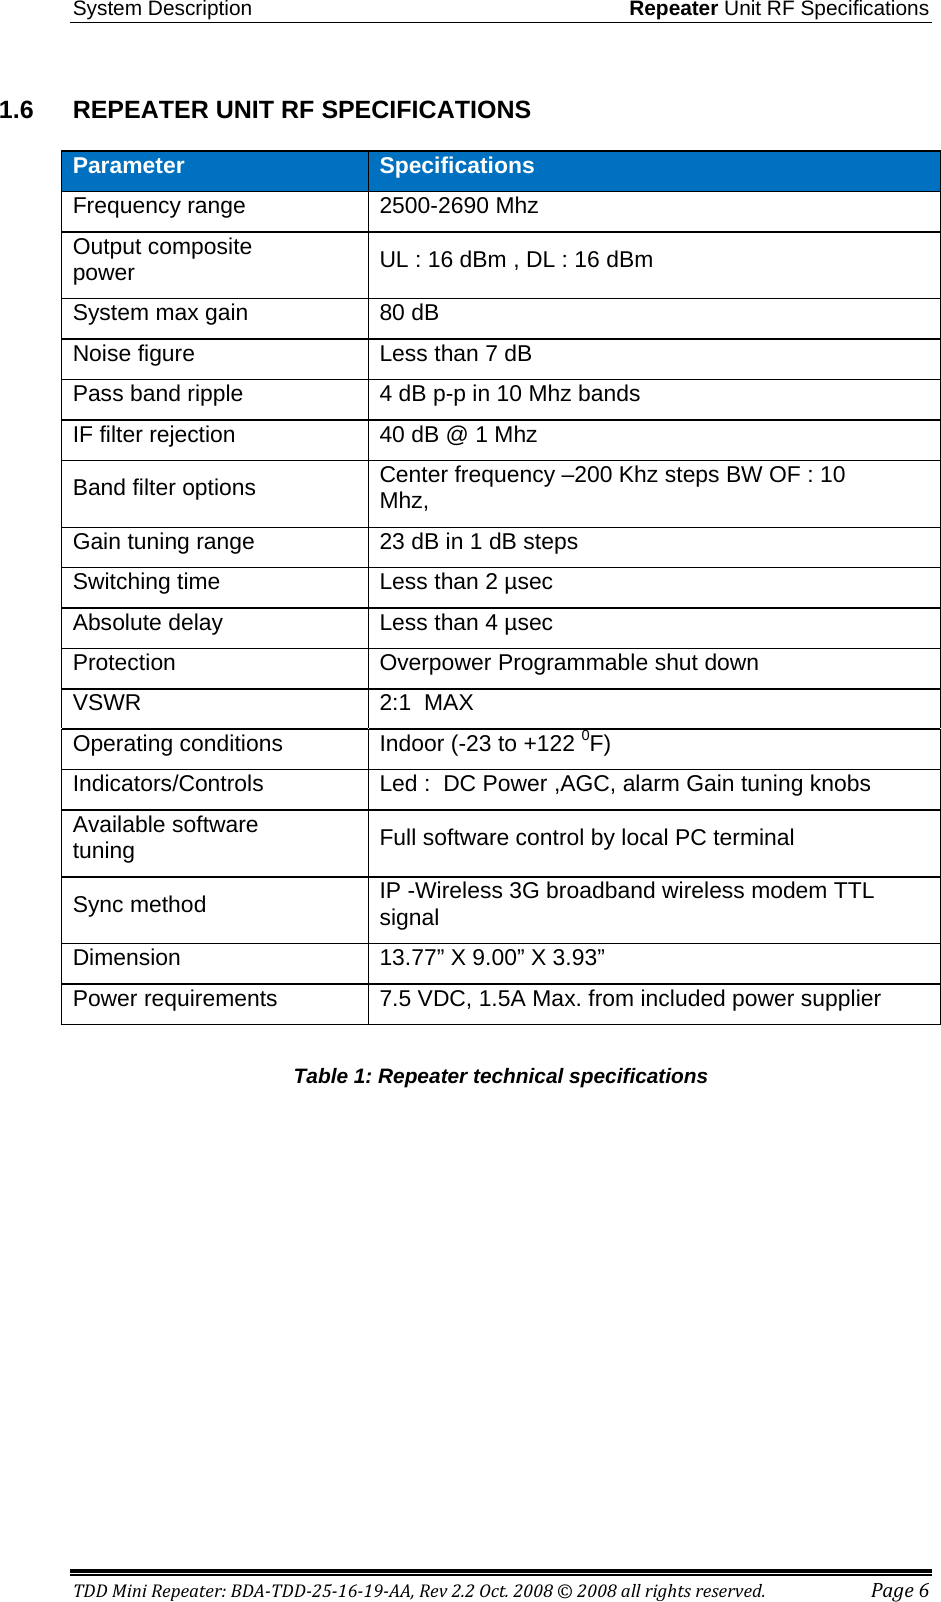 System Description Repeater Unit RF Specifications TDD Mini Repeater: BDA-TDD-25-16-19-AA, Rev 2.2 Oct. 2008 © 2008 all rights reserved. Page 6 1.6  REPEATER UNIT RF SPECIFICATIONS  Table 1: Repeater technical specifications  Parameter Specifications Frequency range  2500-2690 Mhz Output composite power UL : 16 dBm , DL : 16 dBm System max gain 80 dB   Noise figure Less than 7 dB   Pass band ripple 4 dB p-p in 10 Mhz bands  IF filter rejection 40 dB @ 1 Mhz Band filter options  Center frequency –200 Khz steps BW OF : 10 Mhz, Gain tuning range  23 dB in 1 dB steps Switching time Less than 2 µsec Absolute delay Less than 4 µsec  Protection Overpower Programmable shut down VSWR 2:1  MAX Operating conditions Indoor (-23 to +122 0F) Indicators/Controls Led :  DC Power ,AGC, alarm Gain tuning knobs Available software tuning Full software control by local PC terminal  Sync method IP -Wireless 3G broadband wireless modem TTL signal Dimension 13.77” X 9.00” X 3.93”  Power requirements 7.5 VDC, 1.5A Max. from included power supplier 